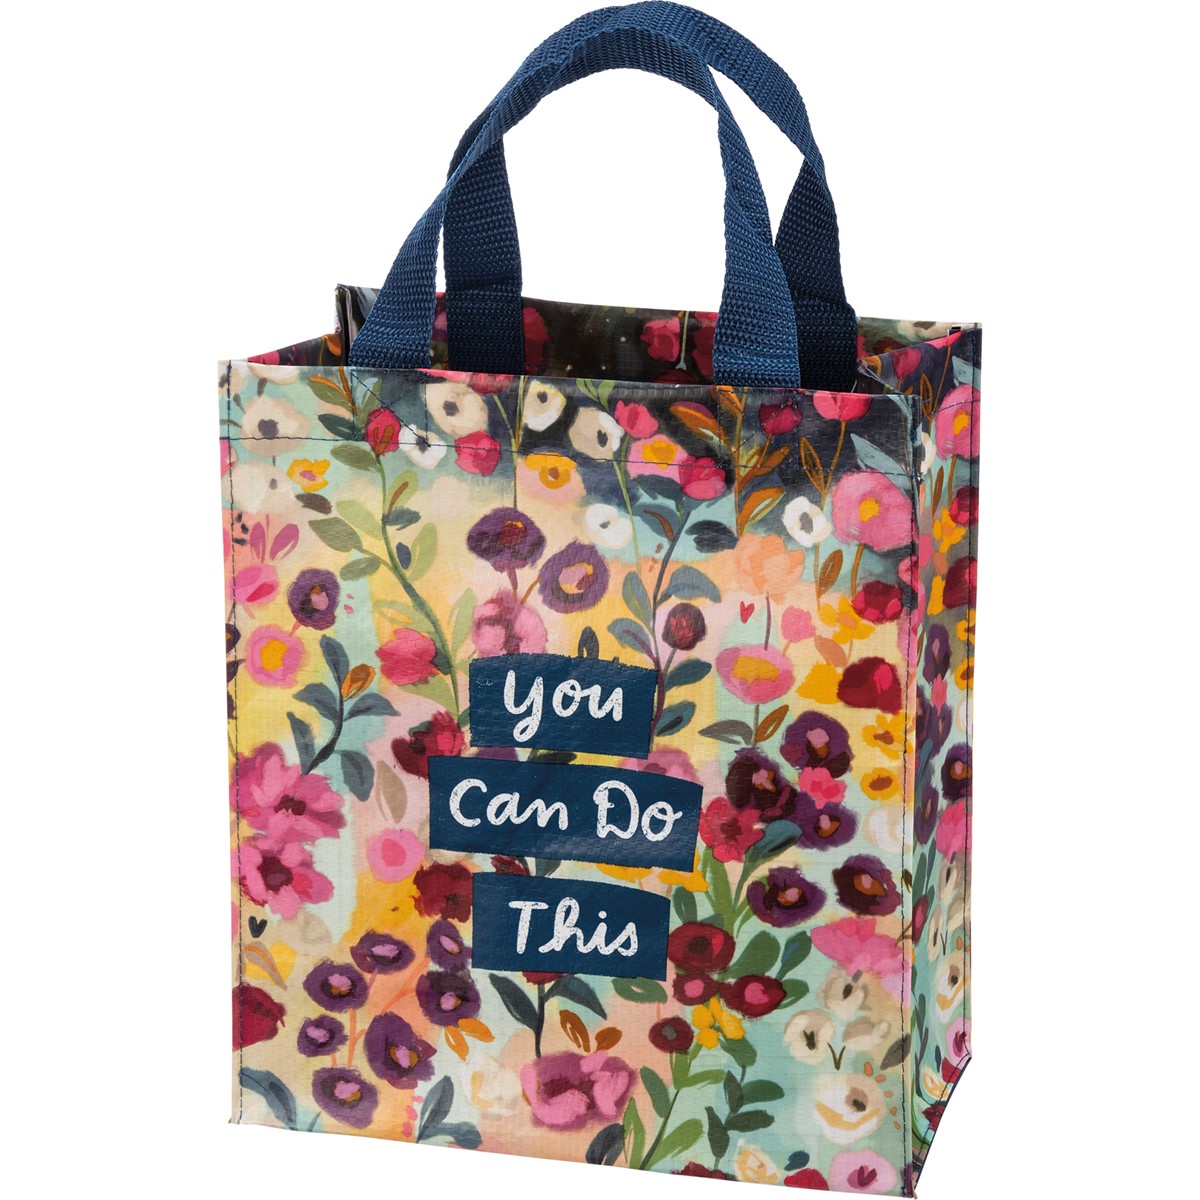 Daily Tote - You Can Do This - 8.75" x 10.25" x 4.75" - Post-Consumer Material, Nylon